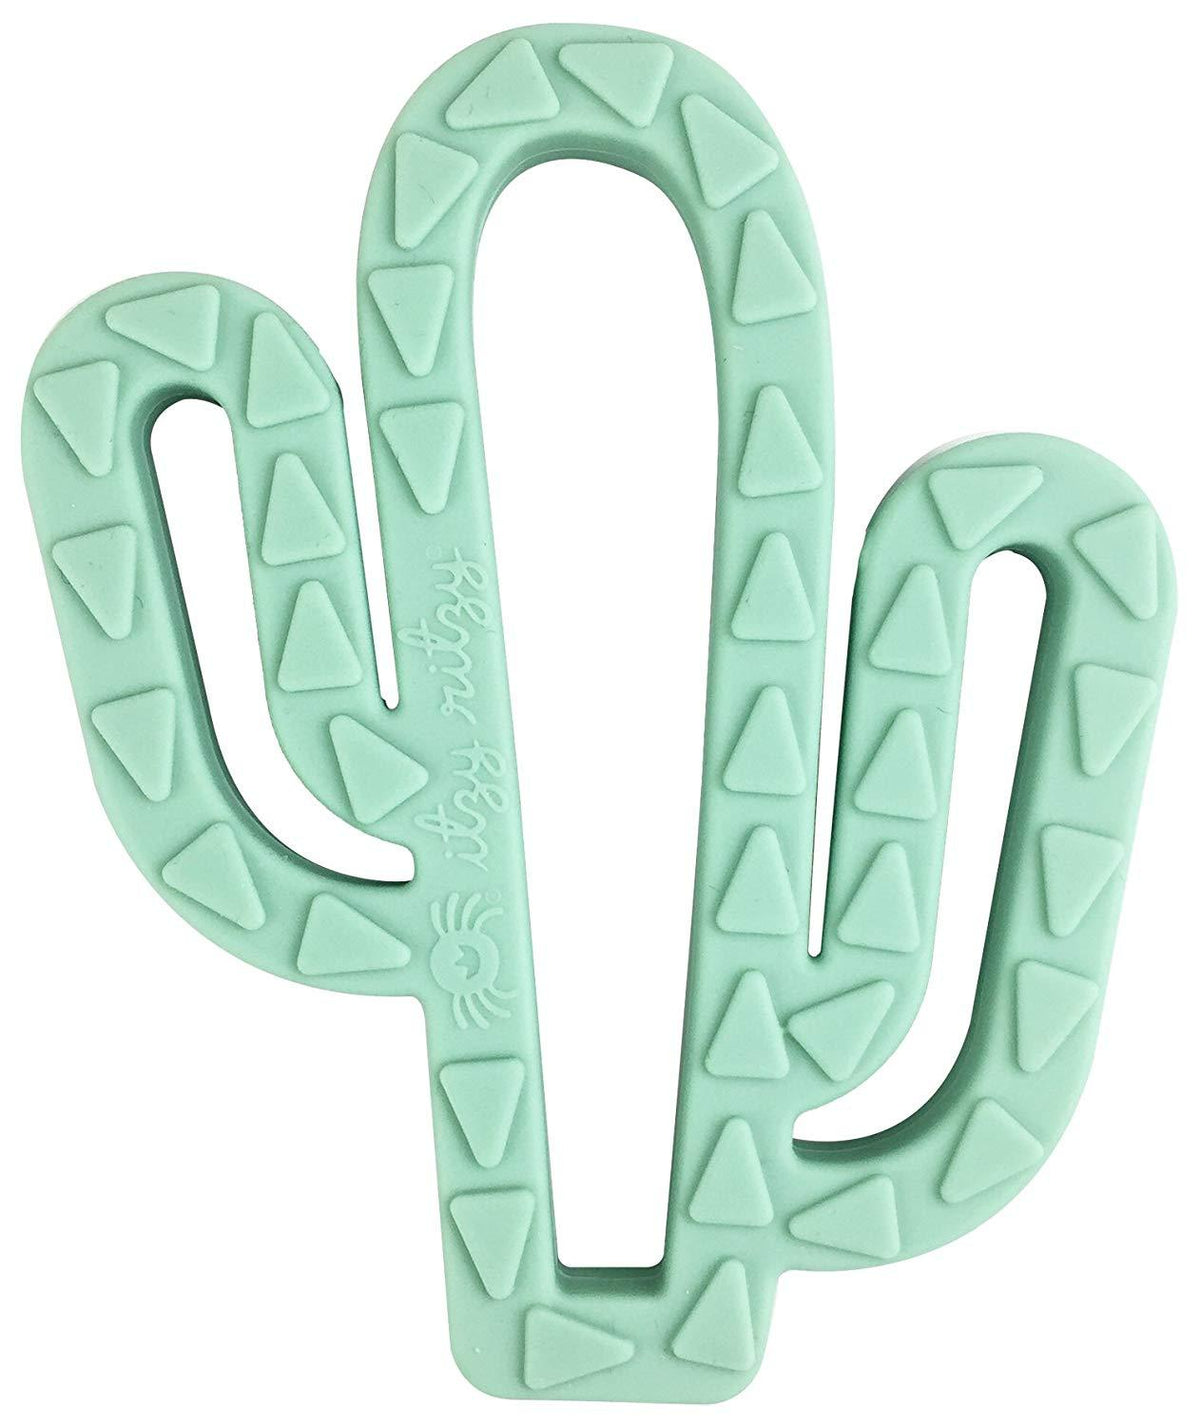 Itzy Ritzy Chew Crew Silicone Teether Cactus